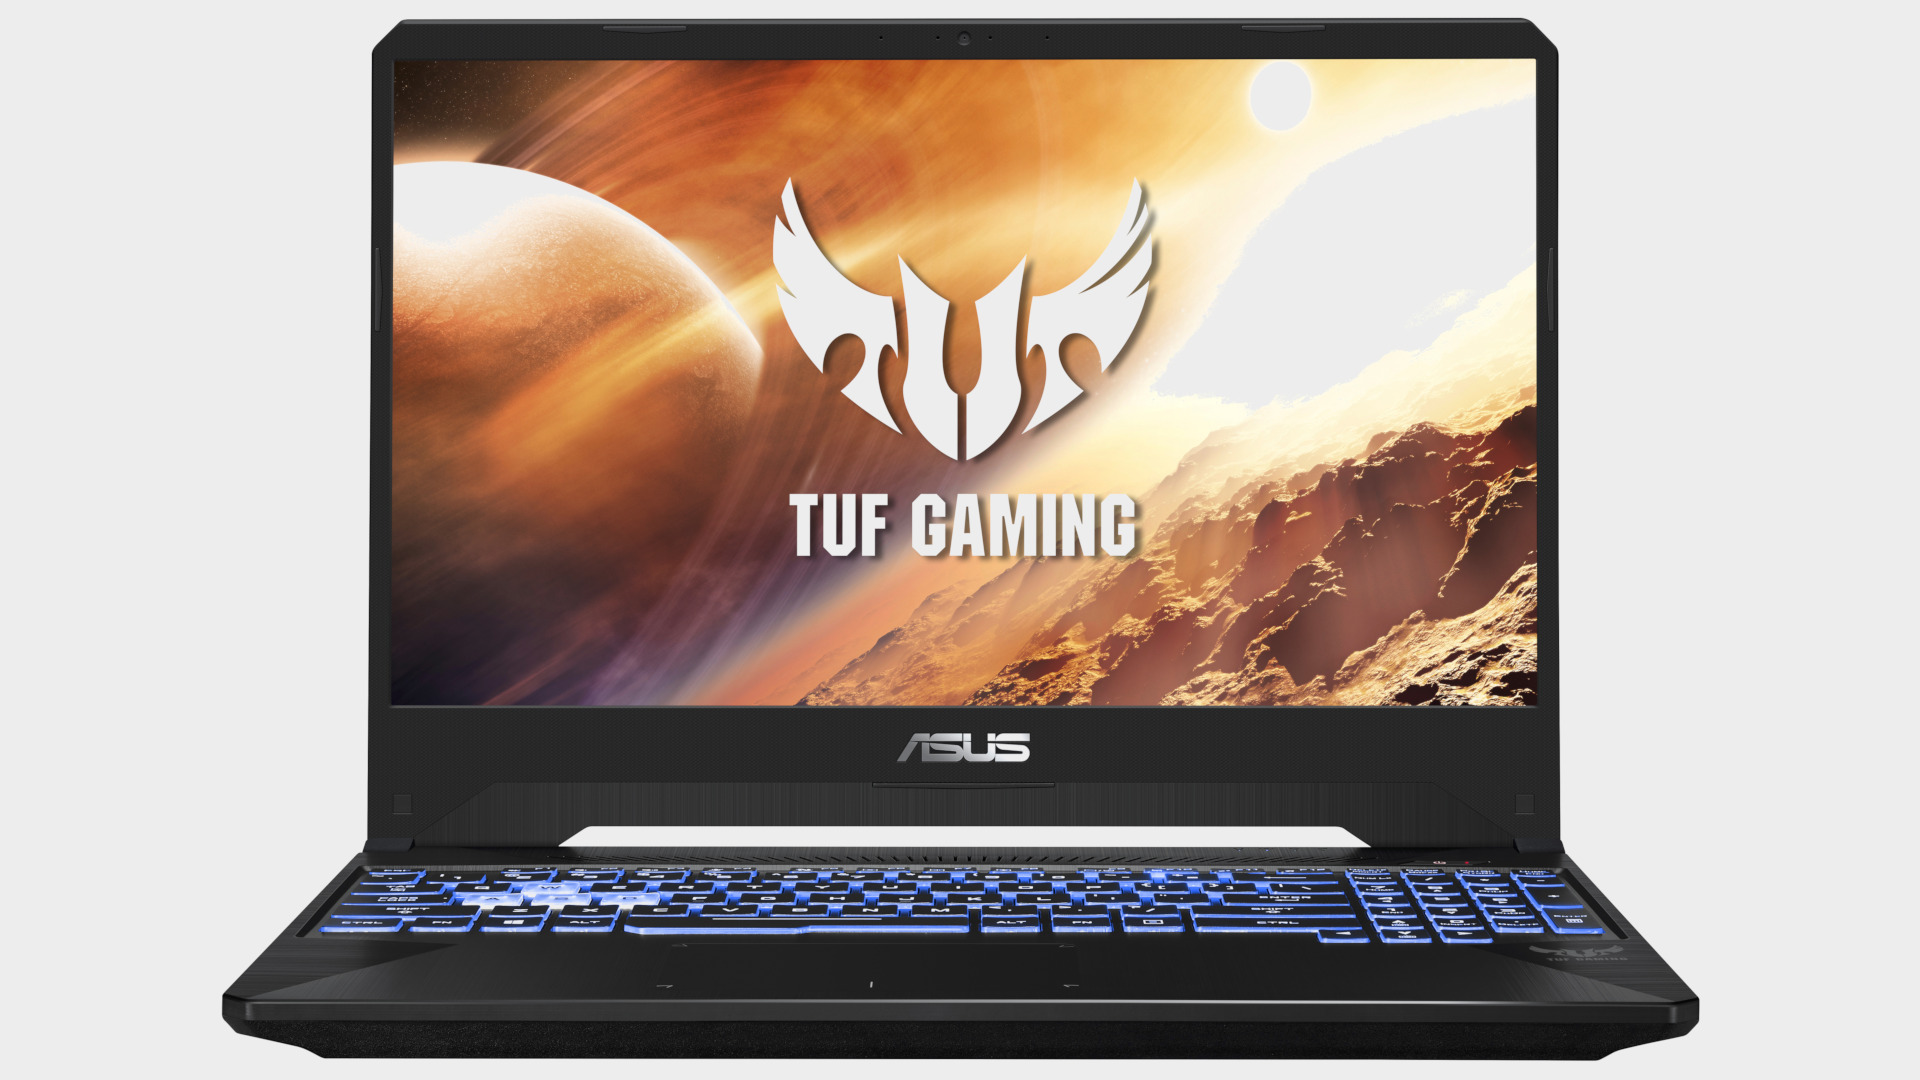 This ASUS laptop with a GTX 1660 Ti is 